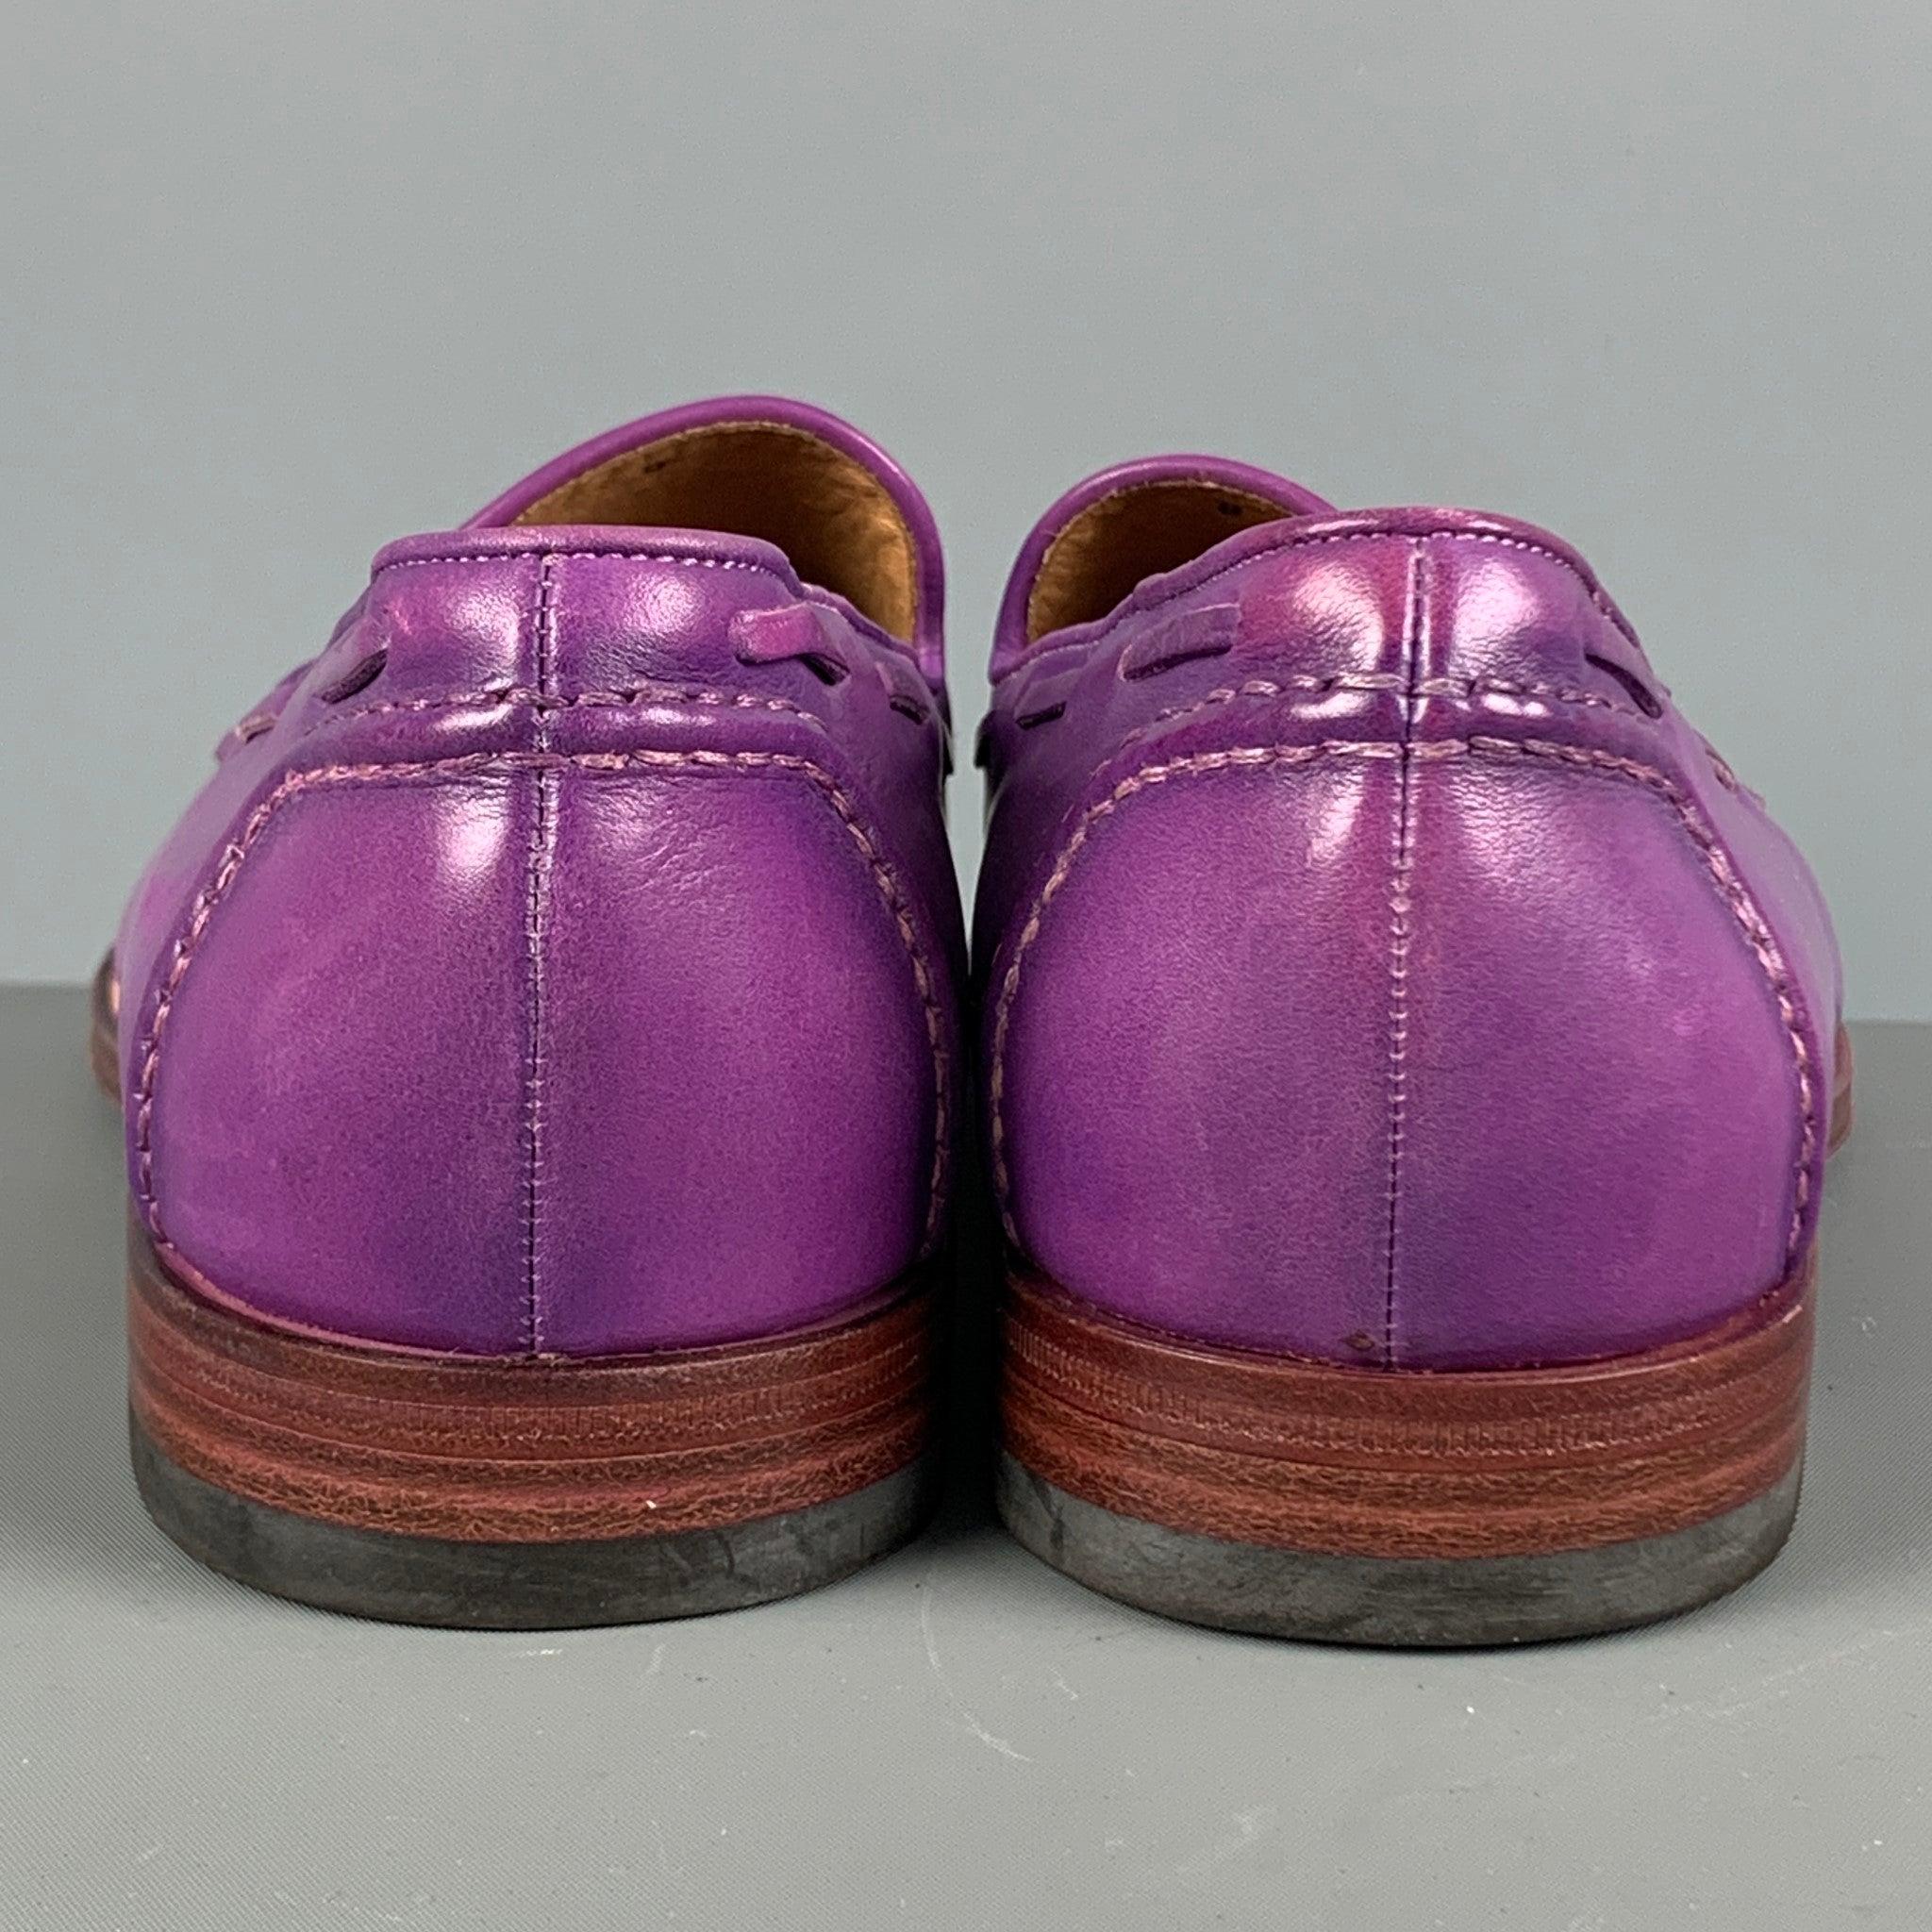 PAUL SMITH Size 9 Purple Antique Leather Tassels Loafers In Excellent Condition For Sale In San Francisco, CA